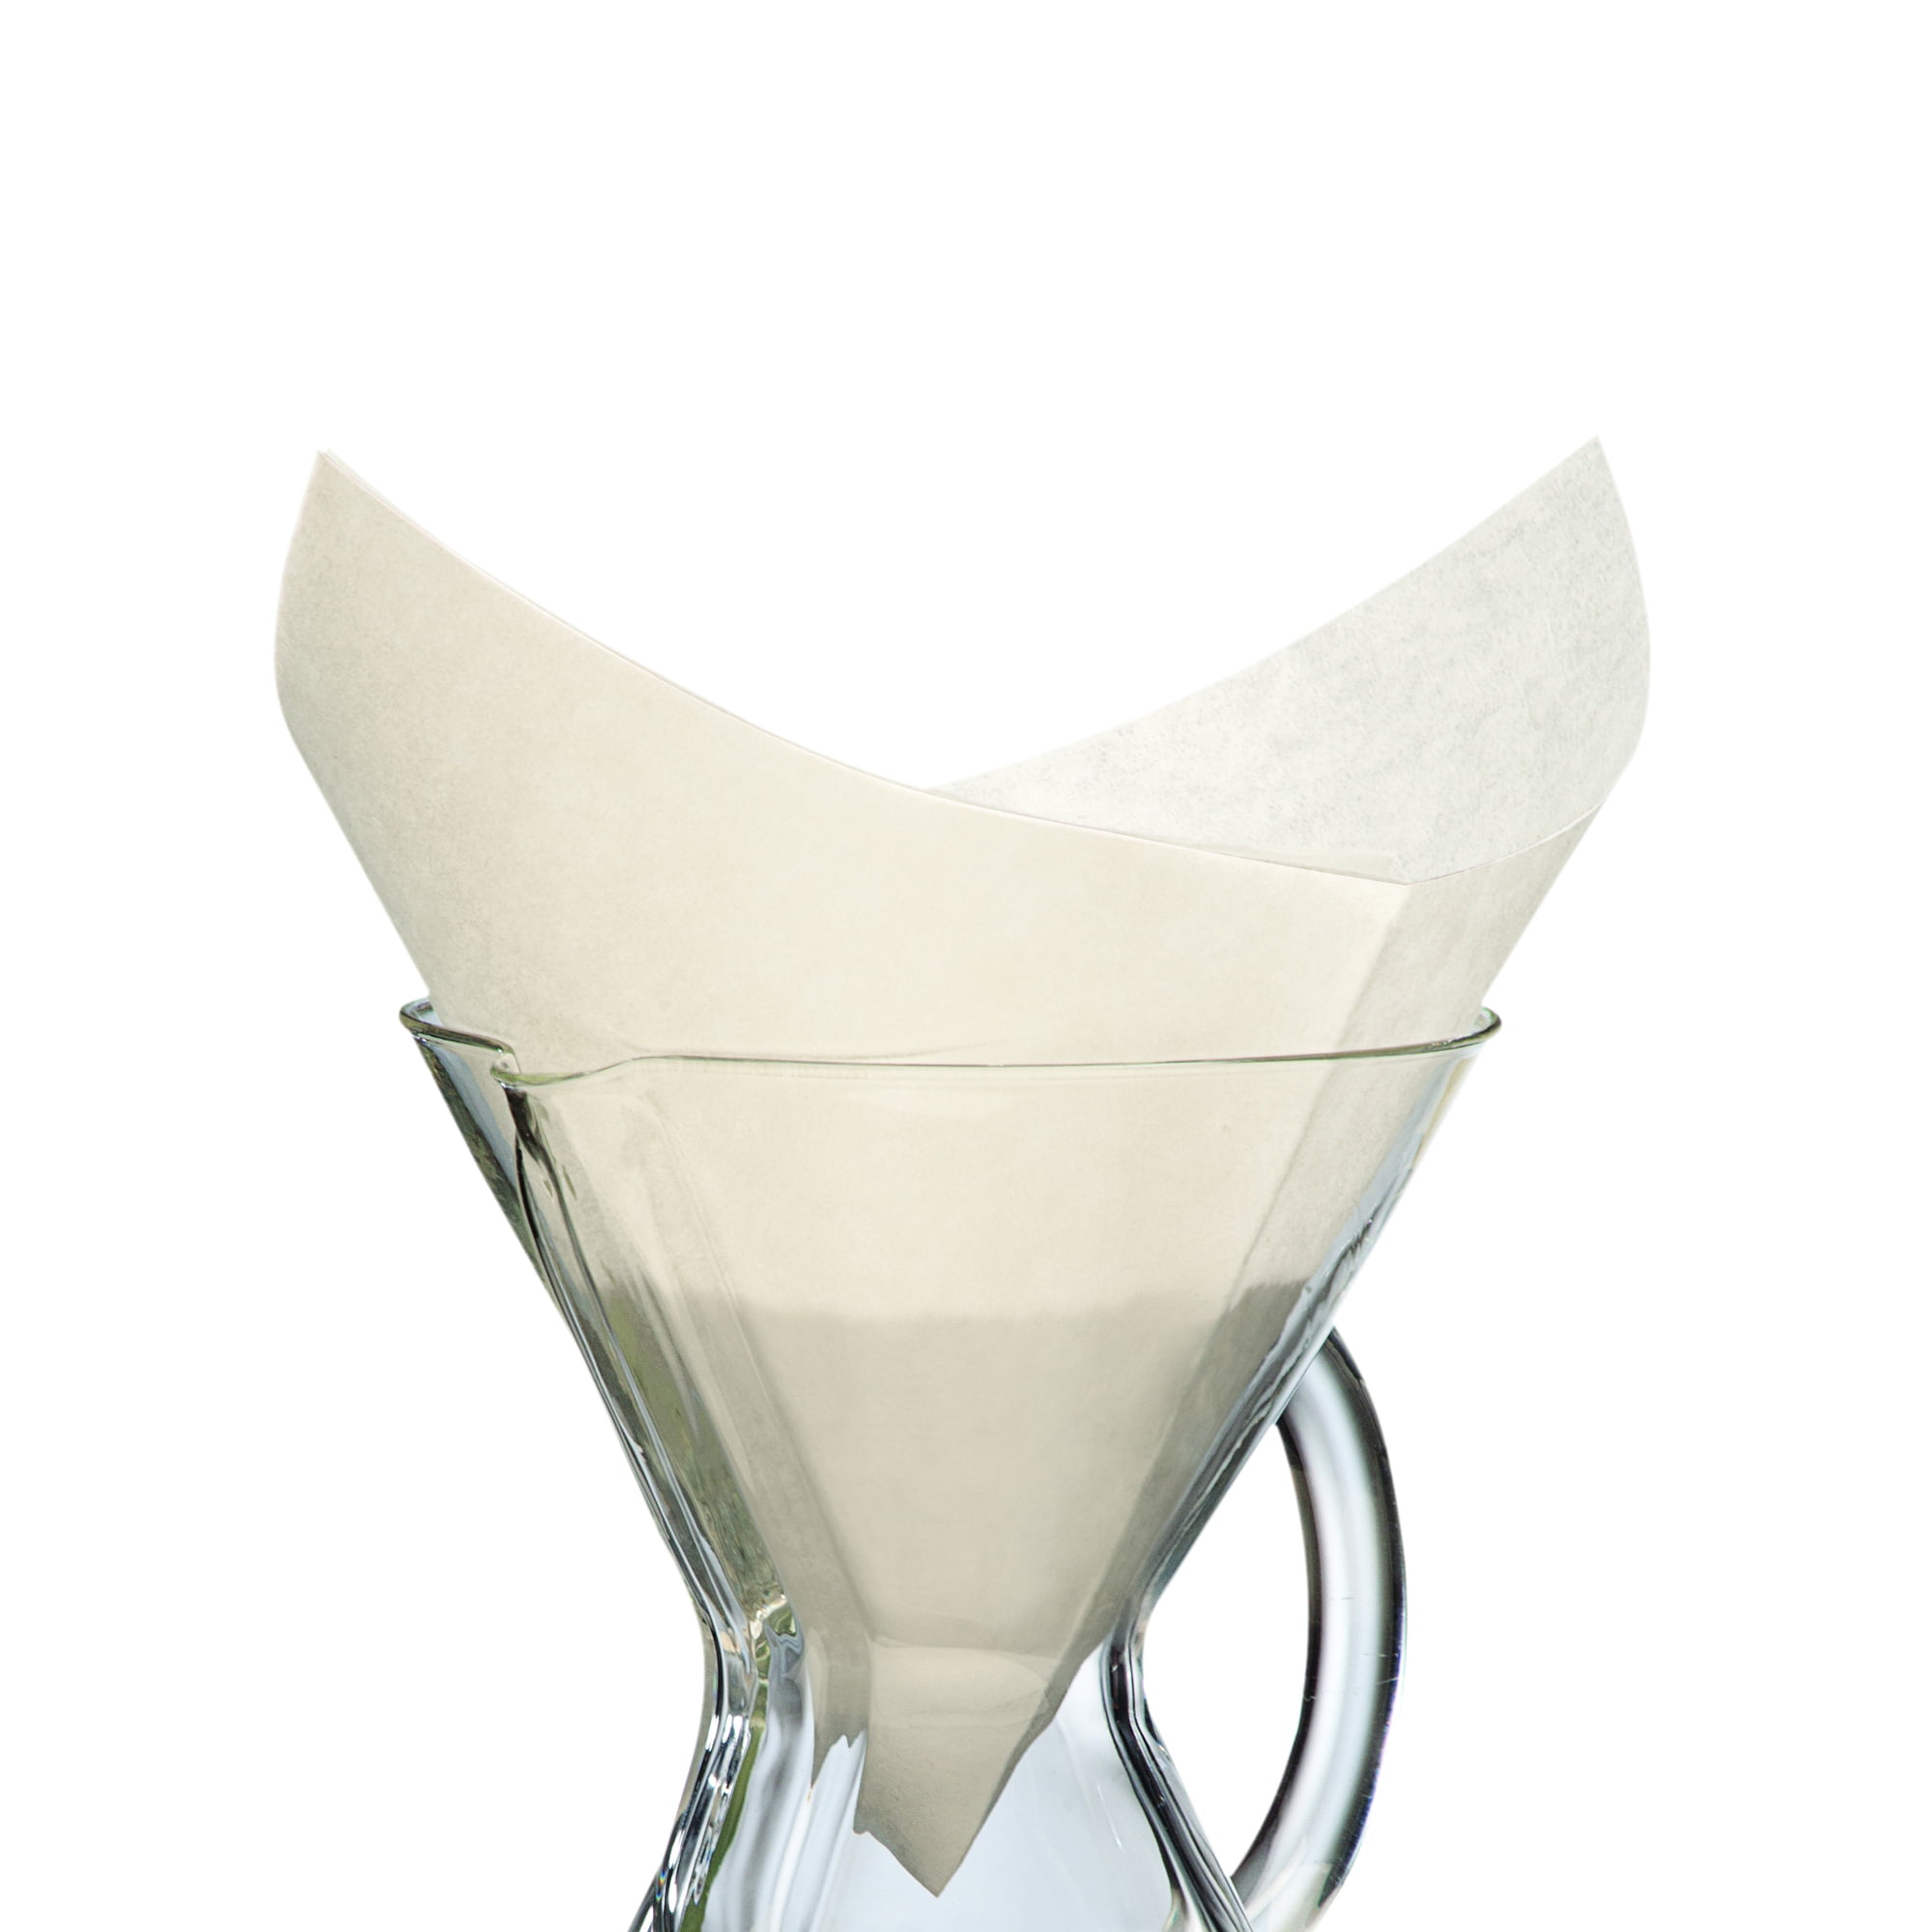 Chemex Coffee Filters, White, Square, 2 Pack, Total 200 Counts